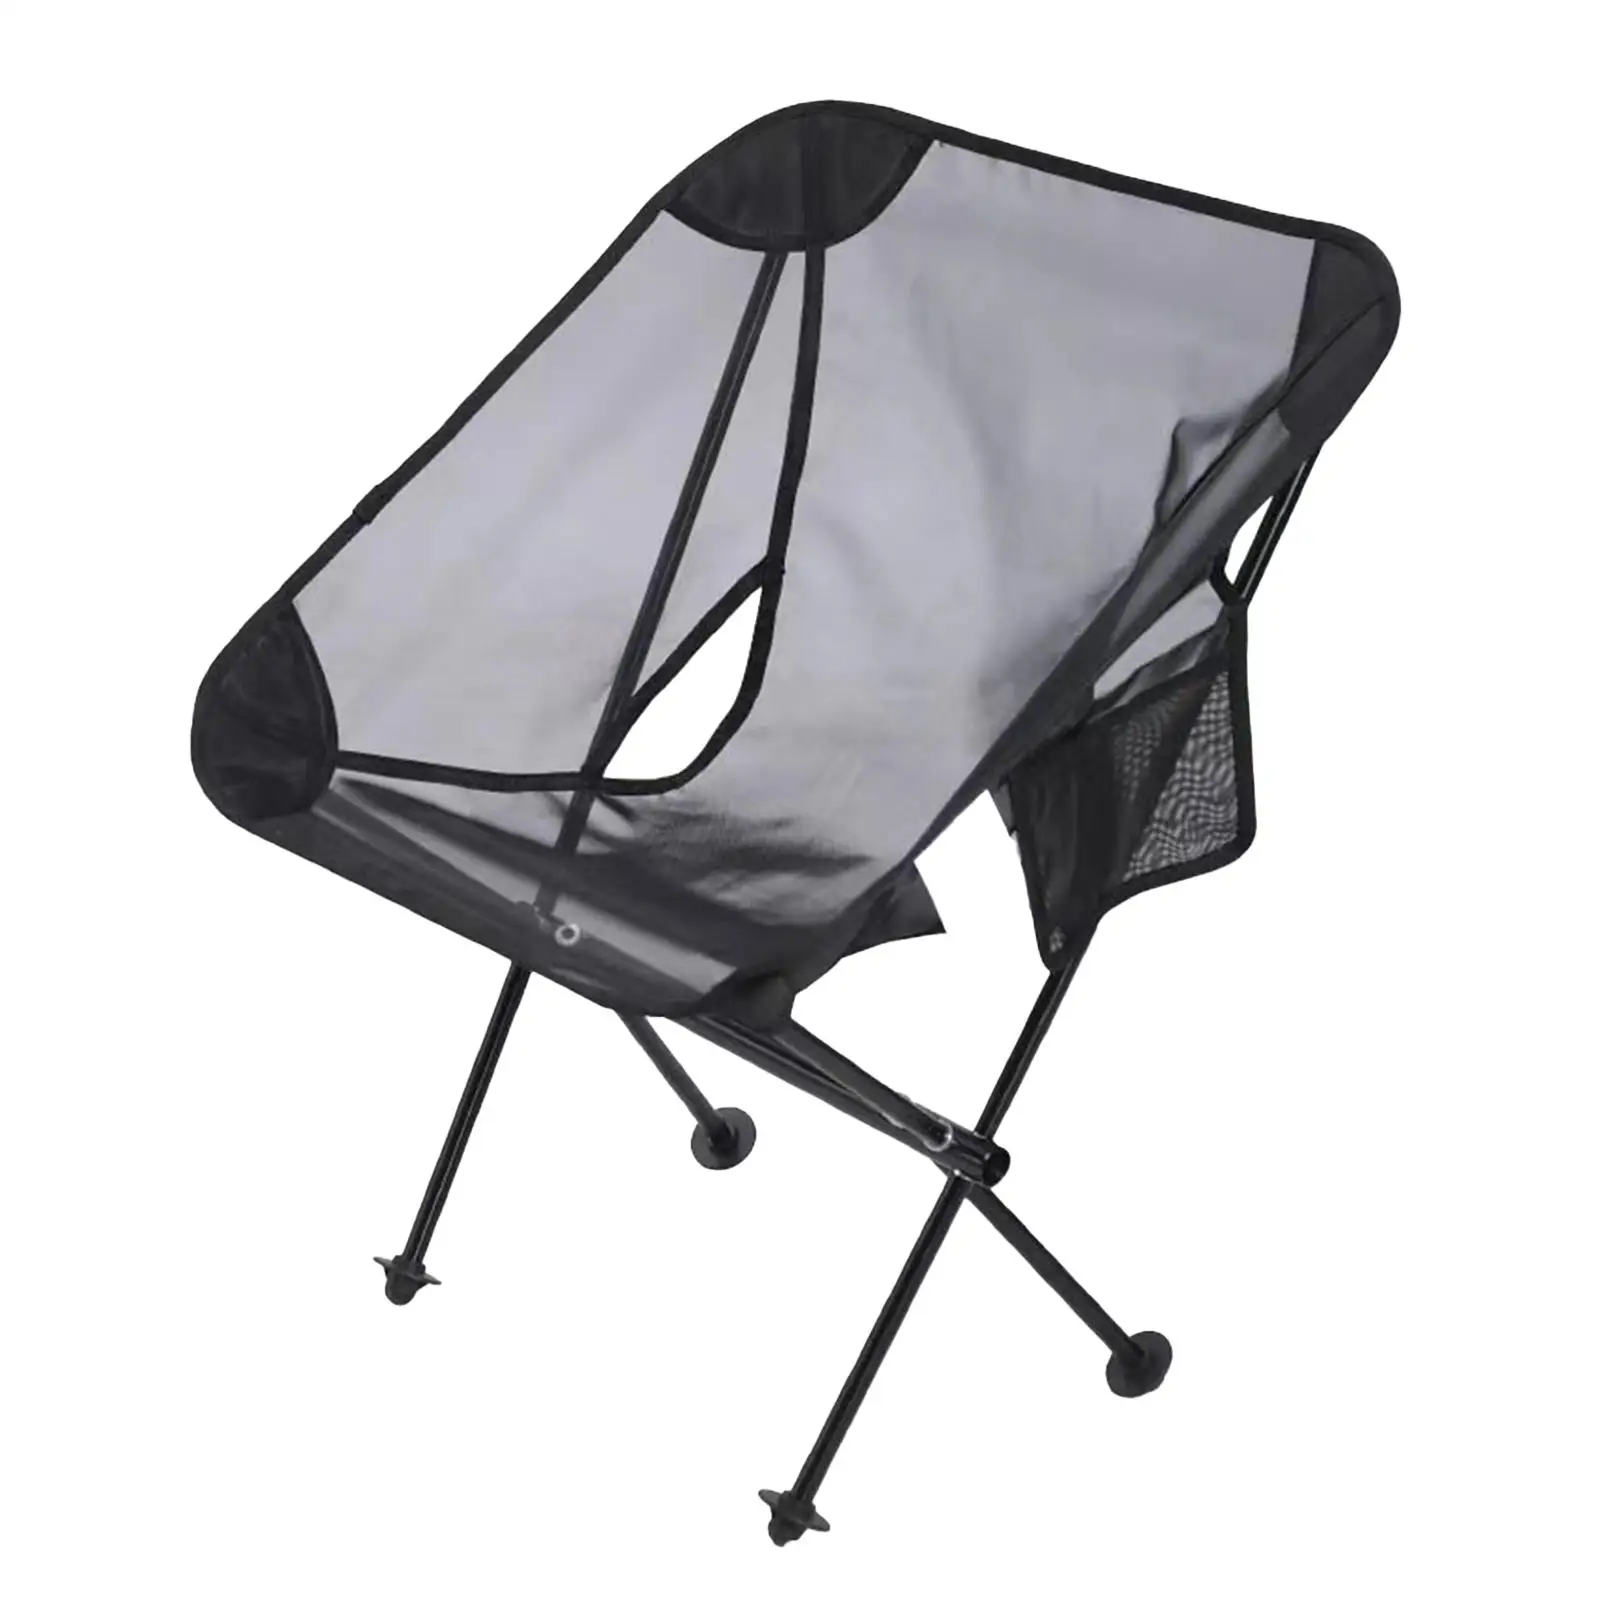 Folding Camping Chair Folding Chair for Park Backpacking Camping Accessory